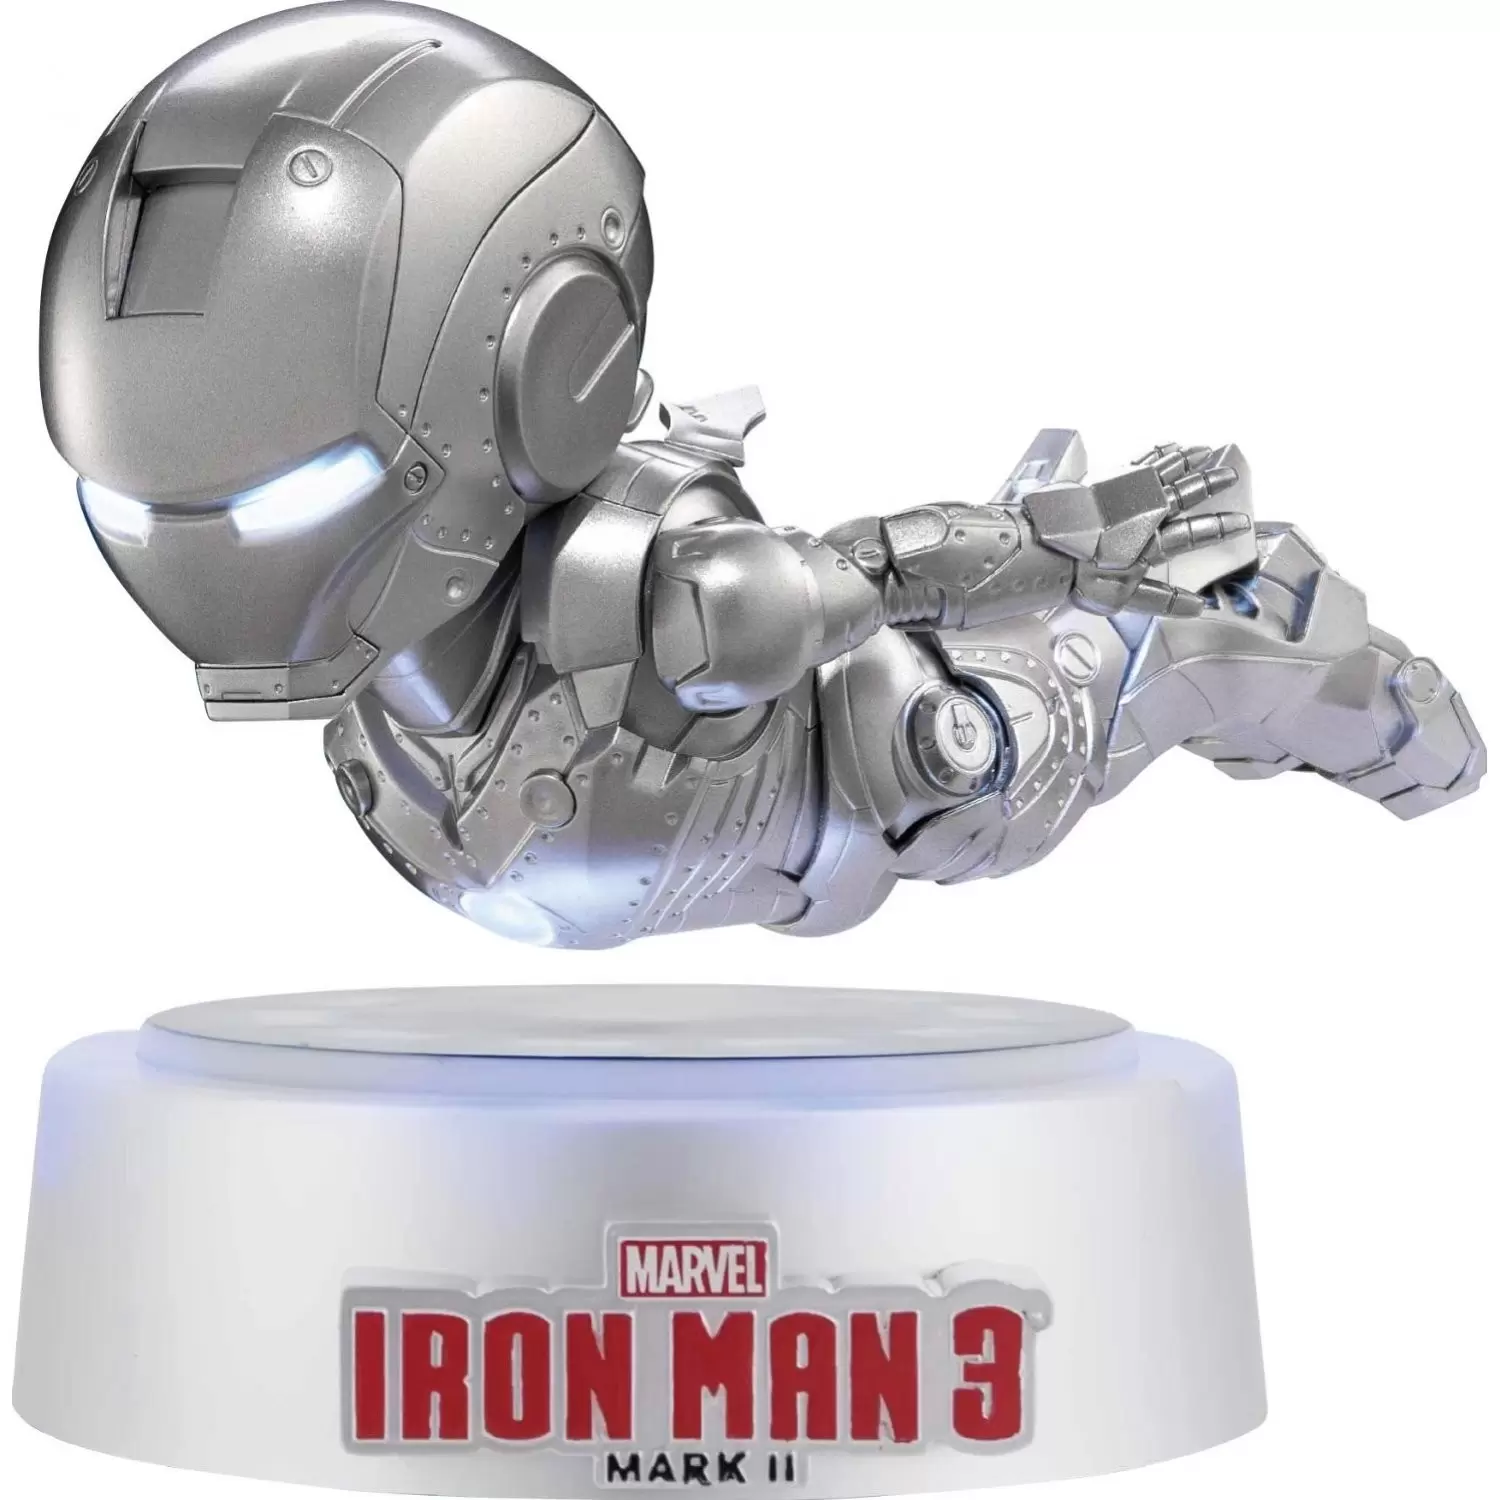 Egg Attack - Iron Man 3 - Mark II - Magnetic Floating Version